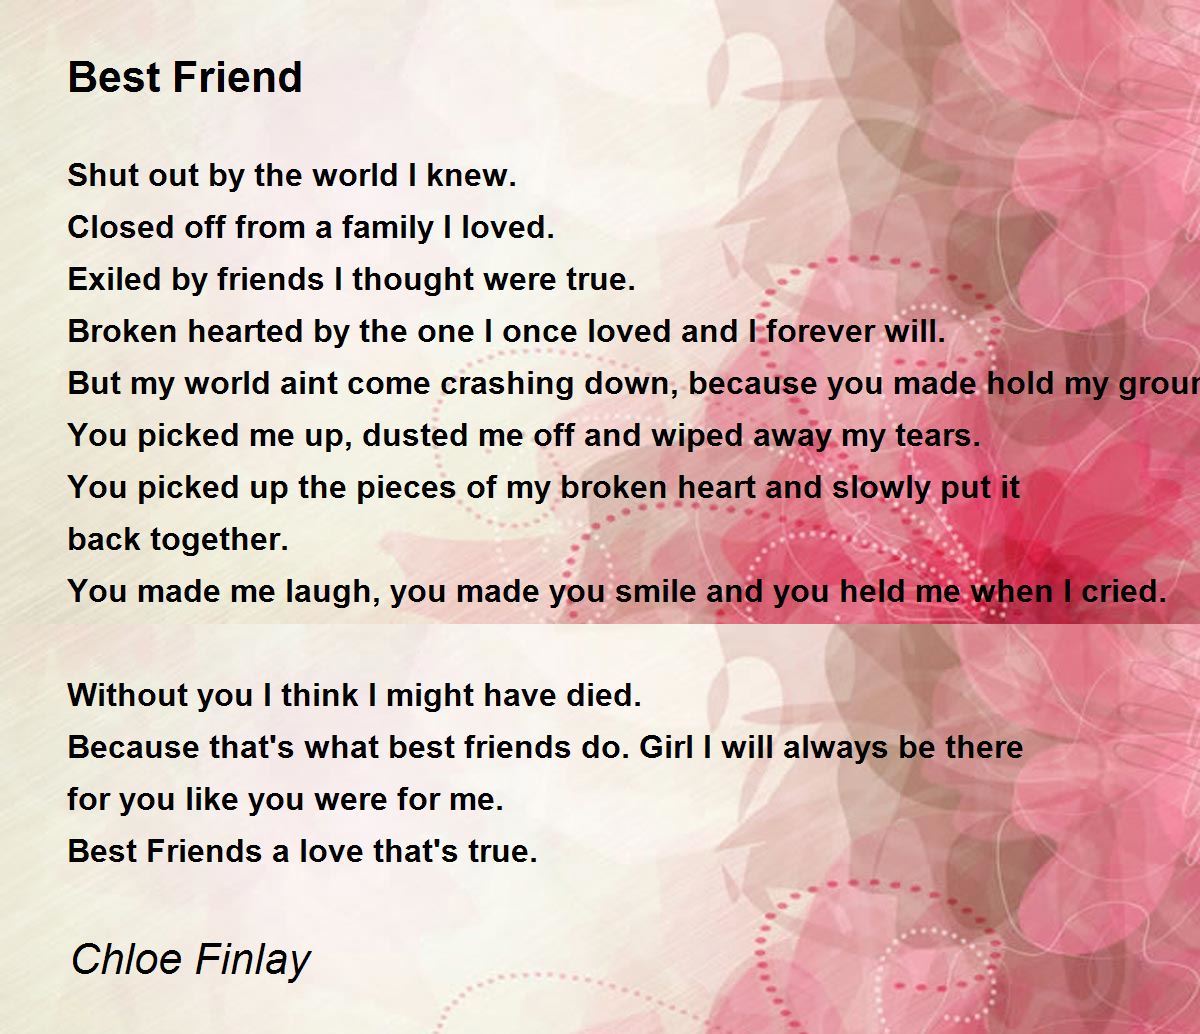 best friend poems that make you smile